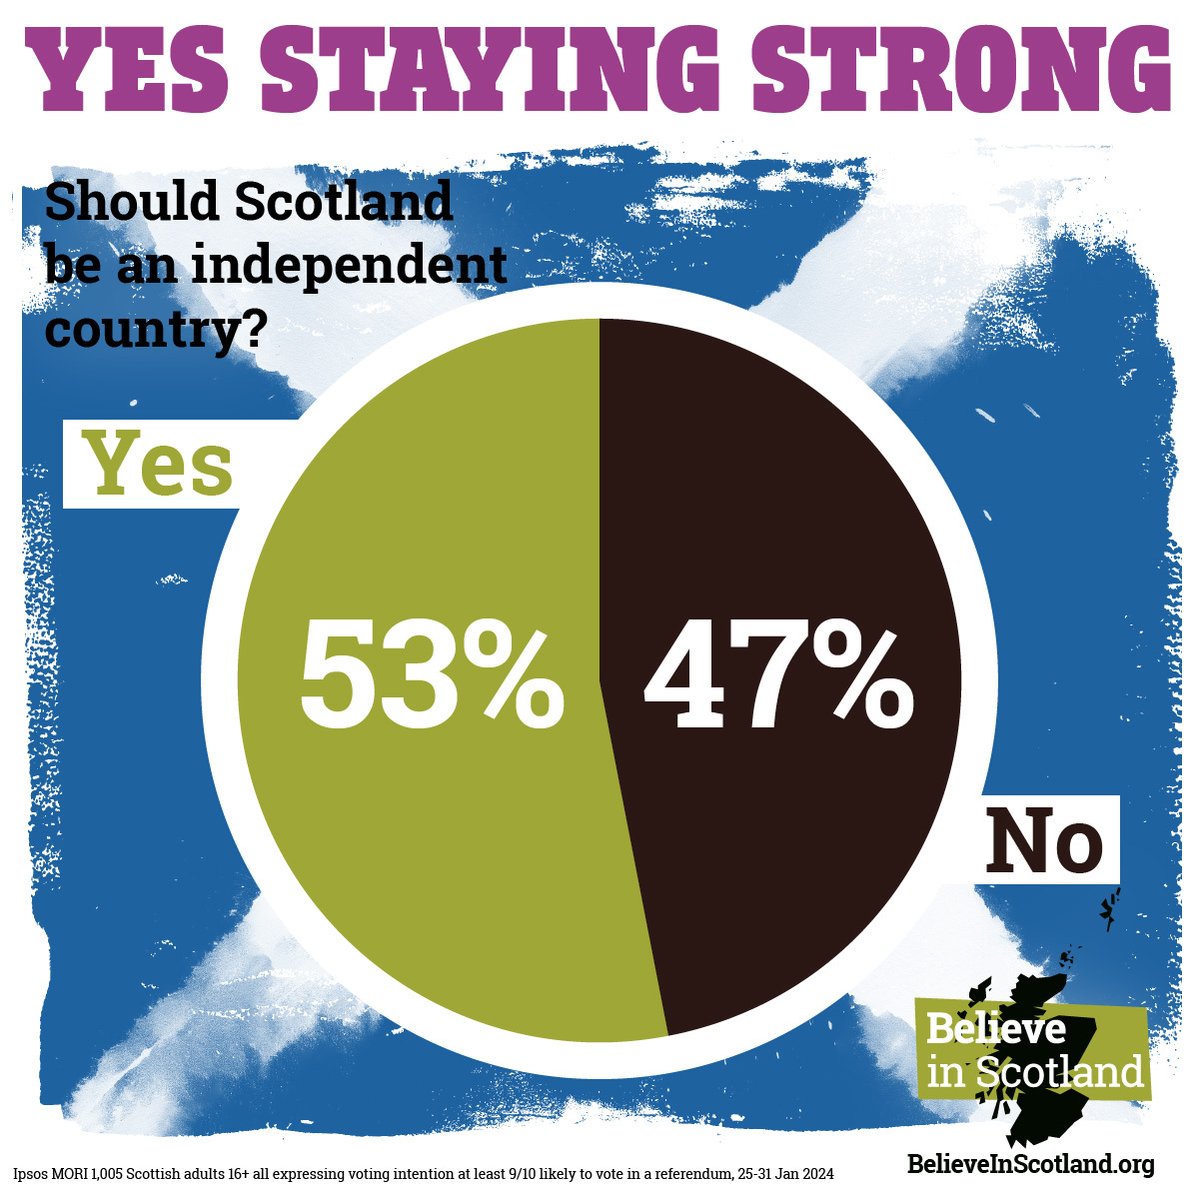 🚨 Breaking: A new poll has Yes staying strong at 53%. #BelieveinScotland